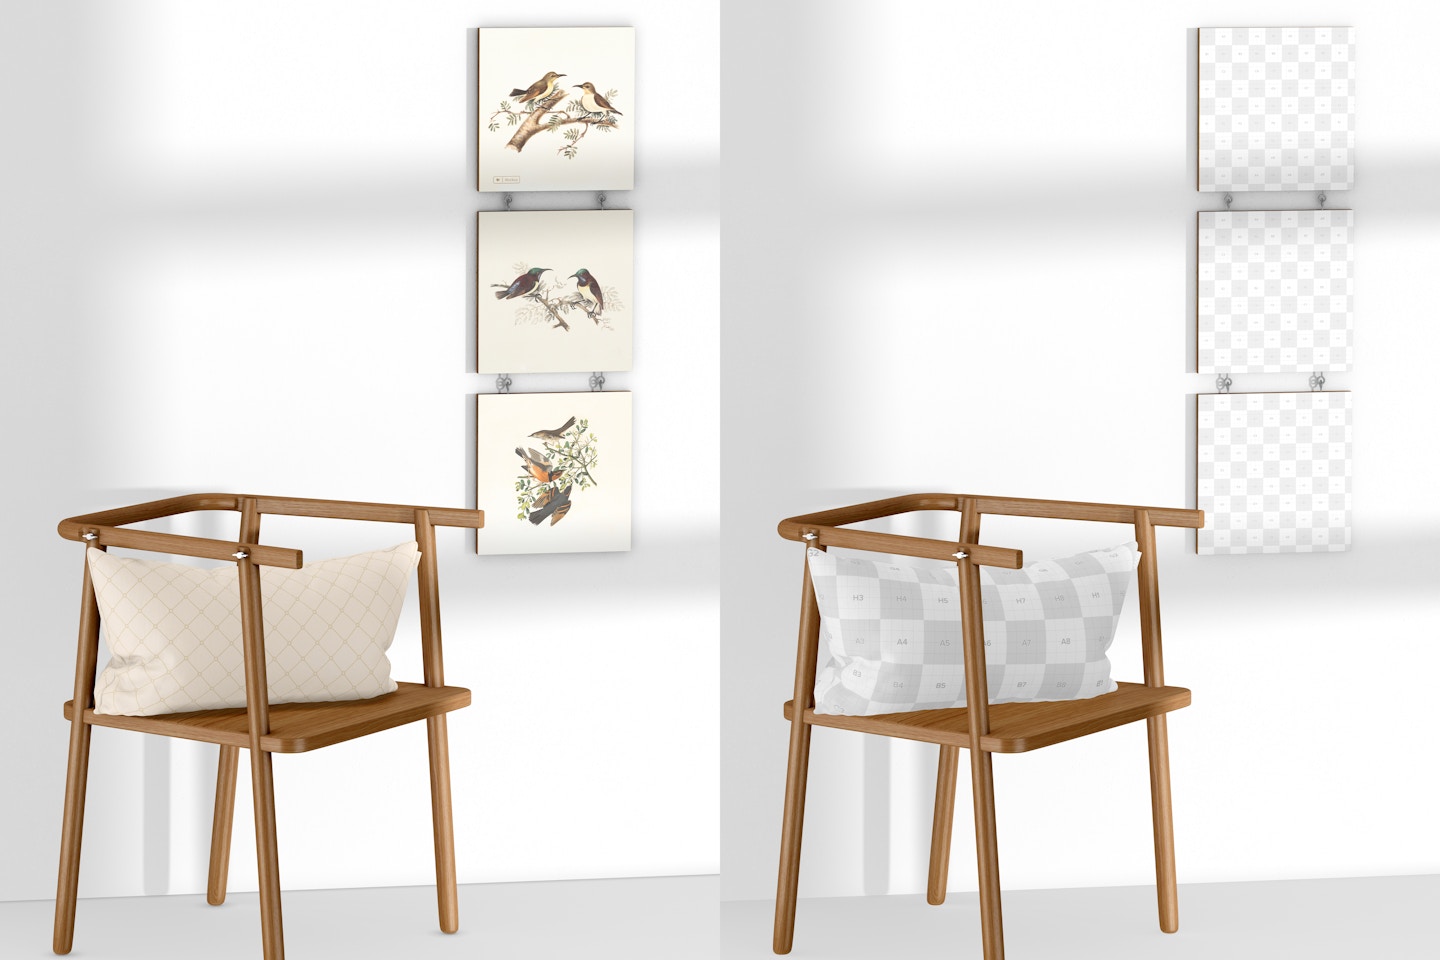 1:1 Triptych with Decor Mockup, Right View